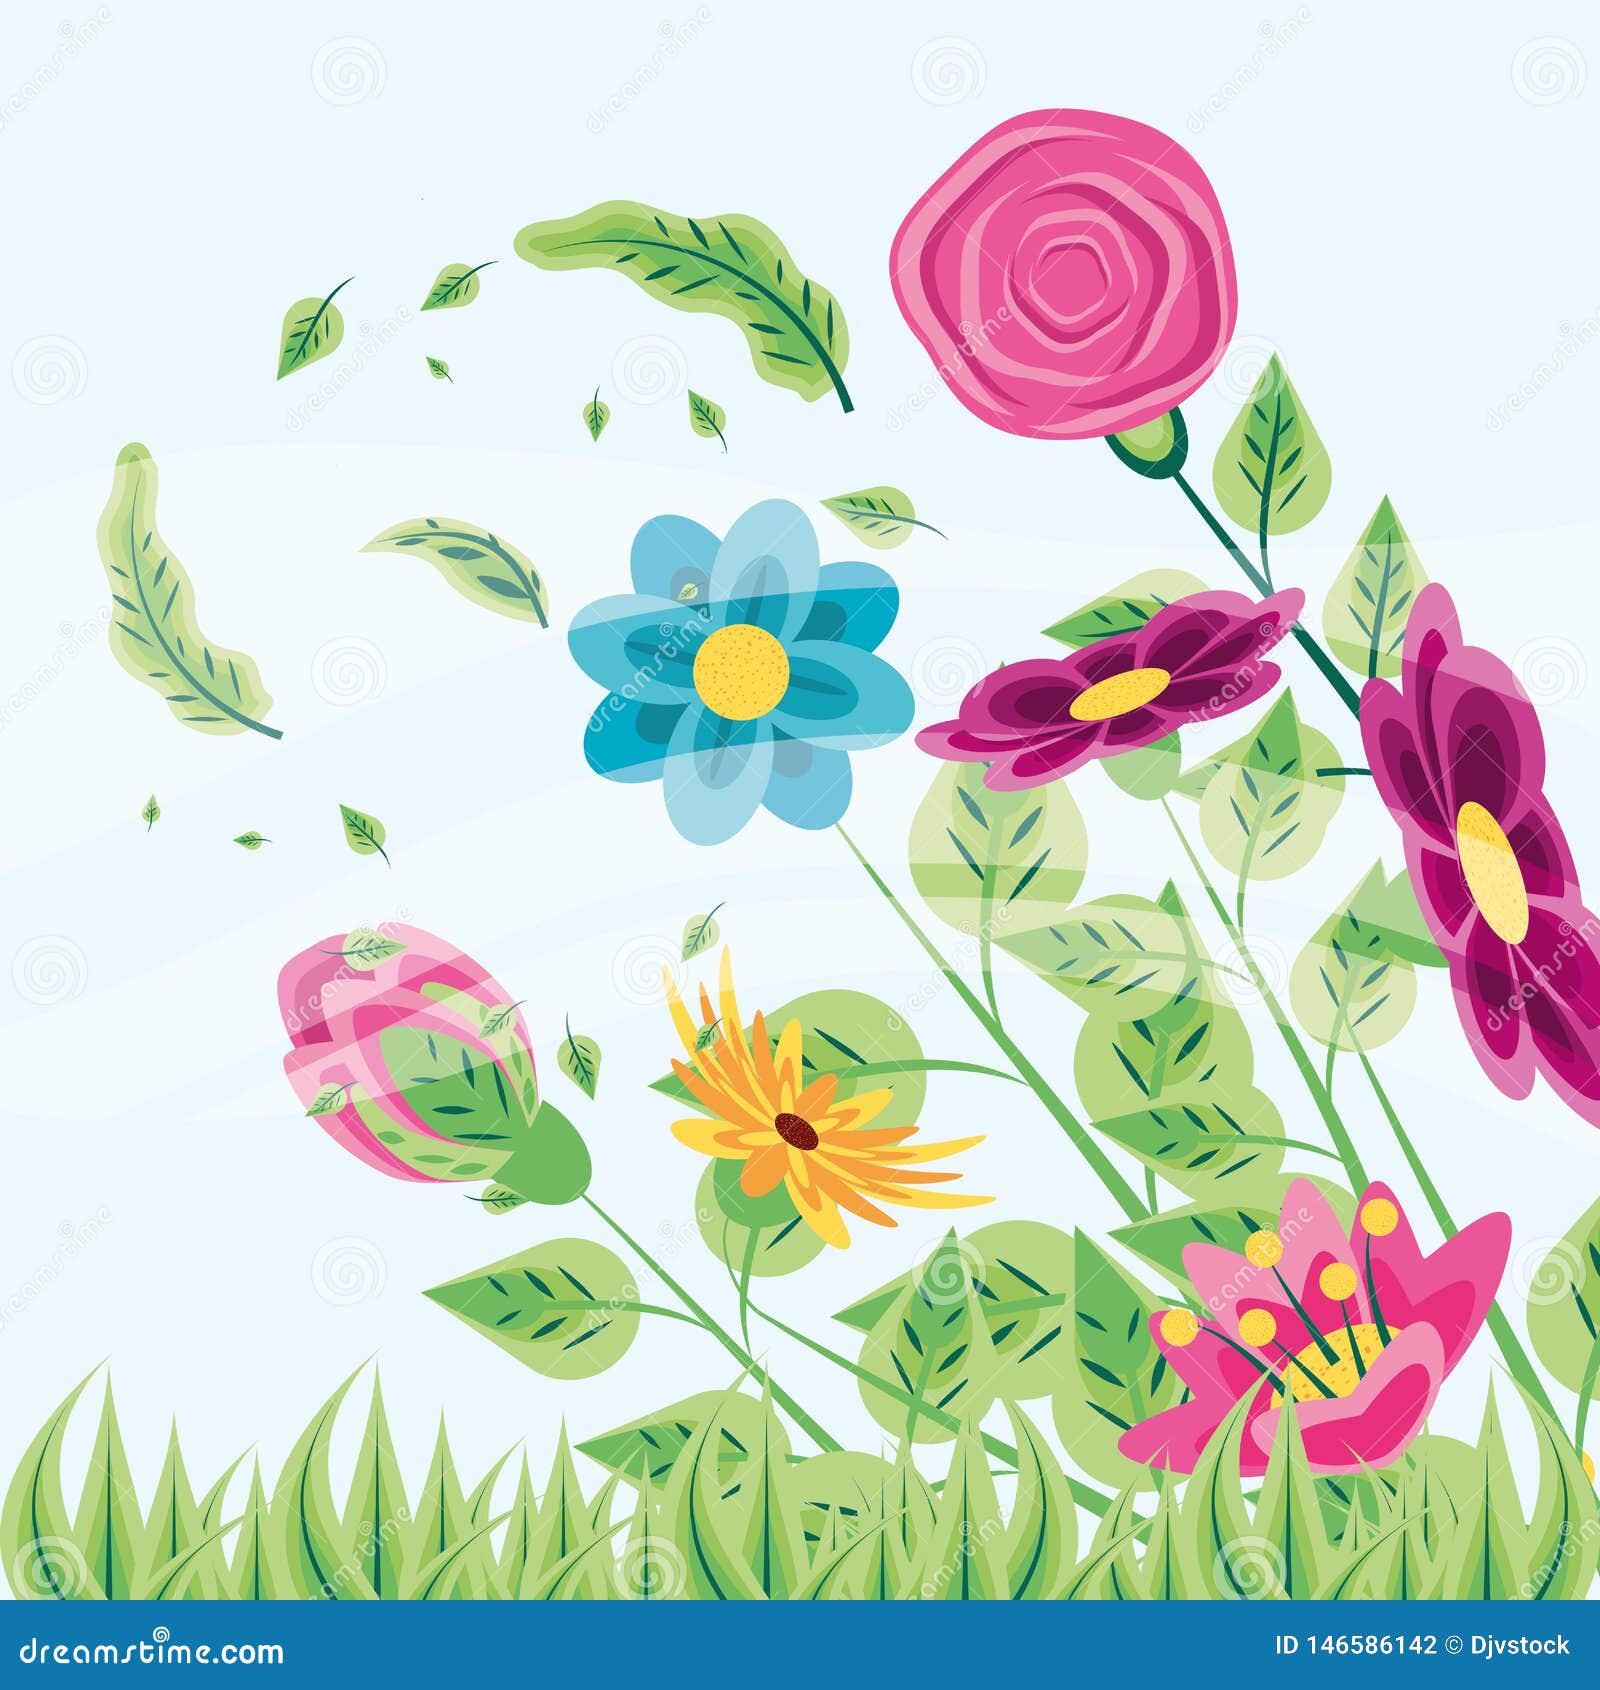 flowers naturals with grass icon